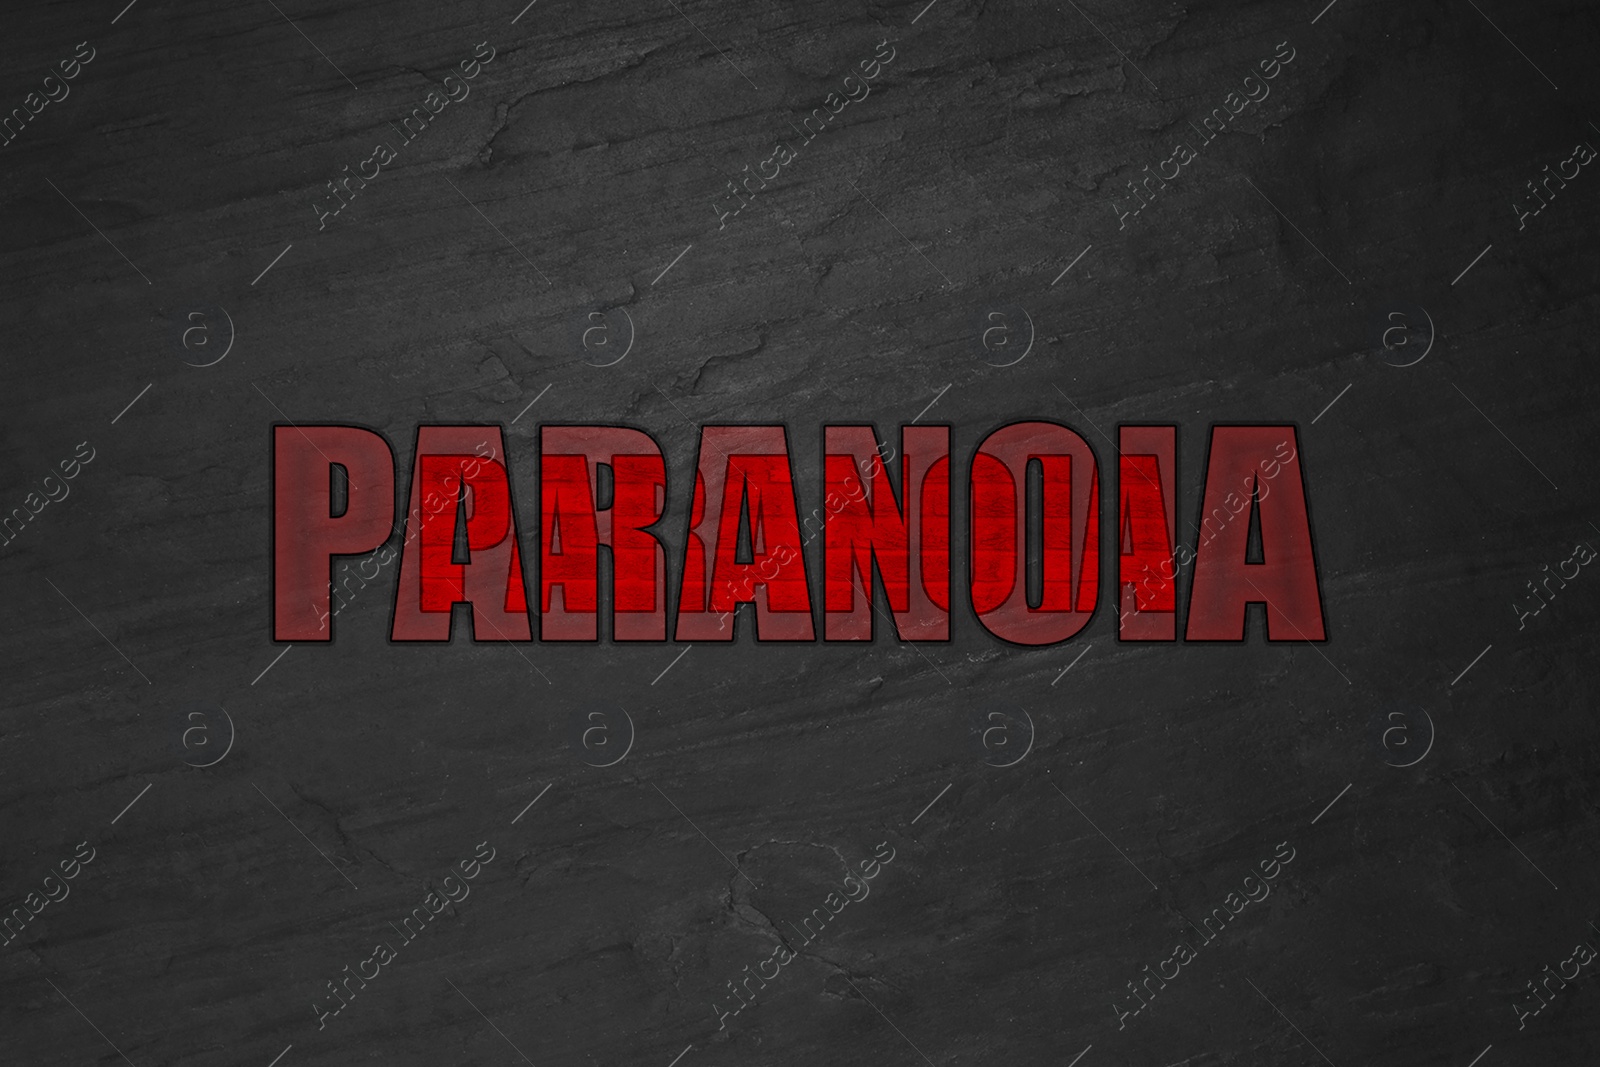 Image of Mental disorder. Words Paranoia on black stone background